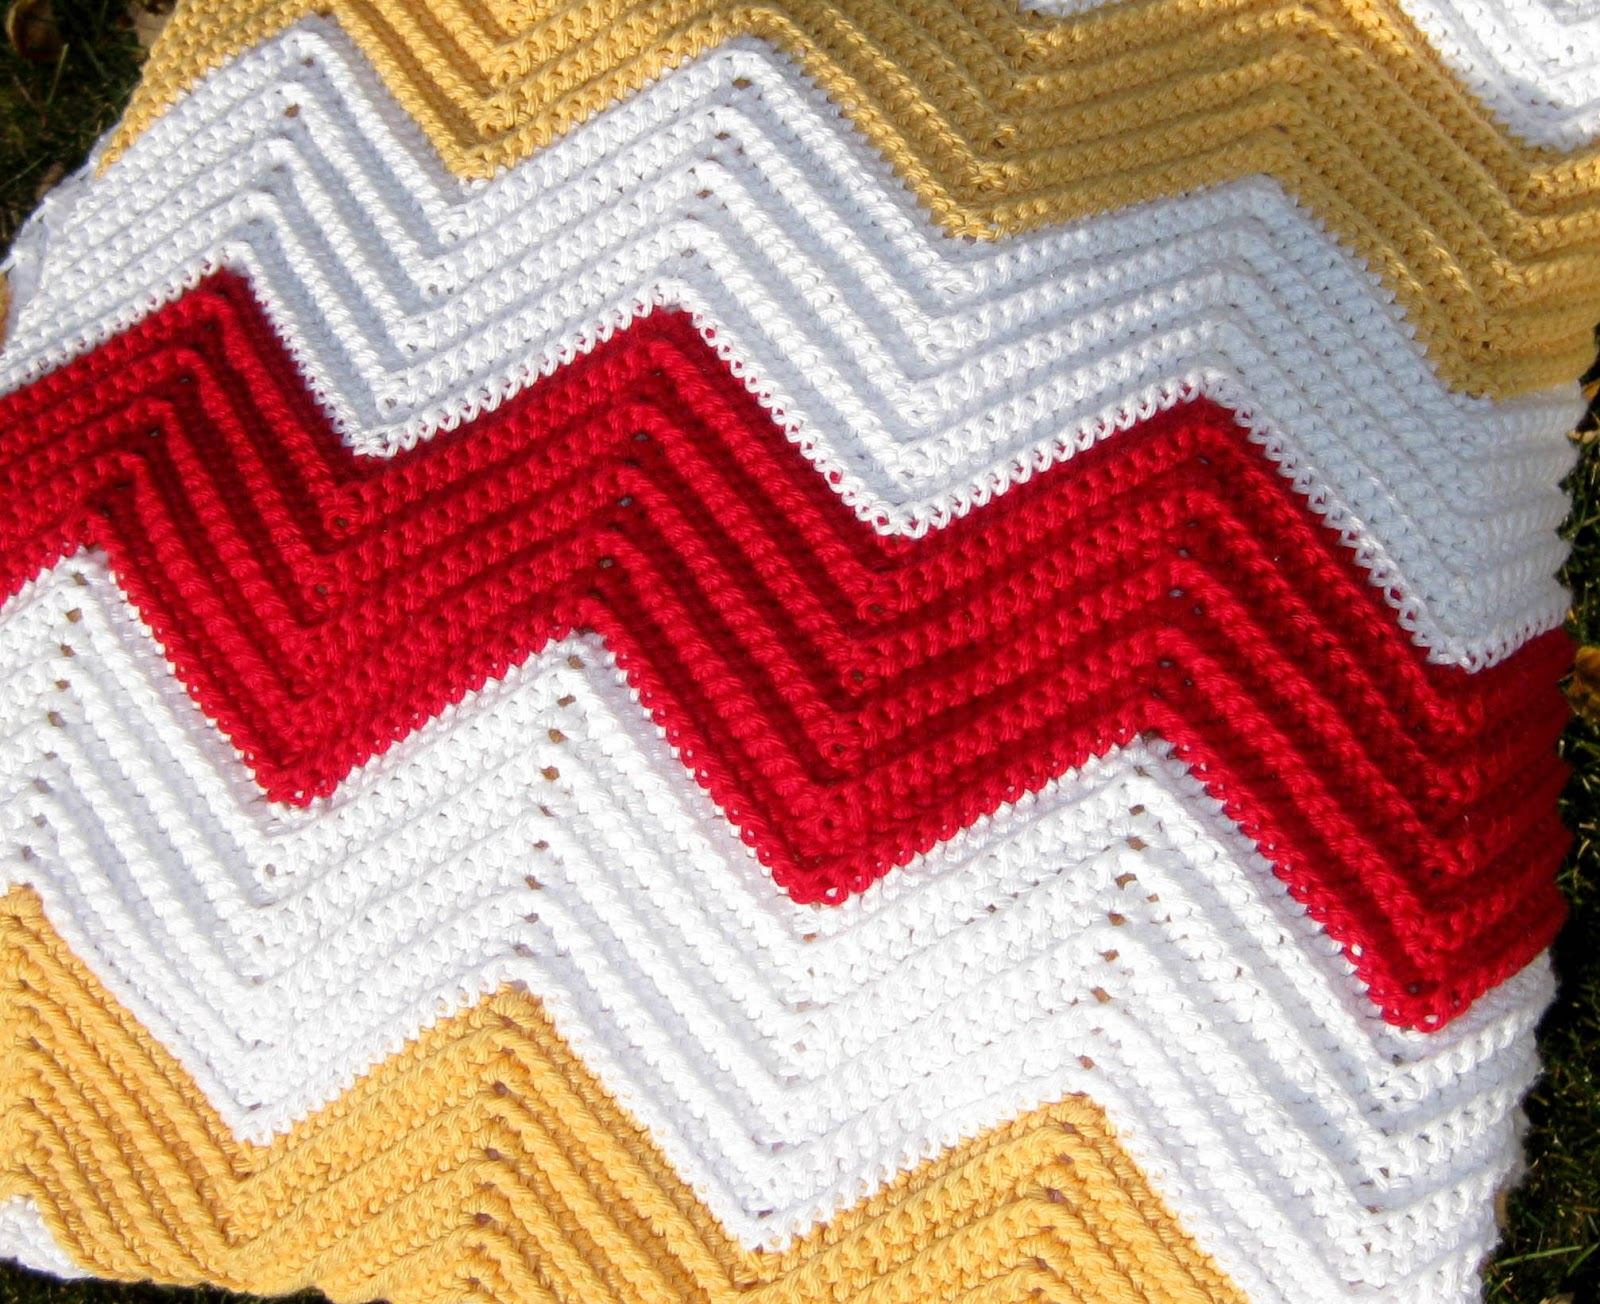 Crochet Ripple Afghan Patterns All Things Bright And Beautiful Chevron Blanket